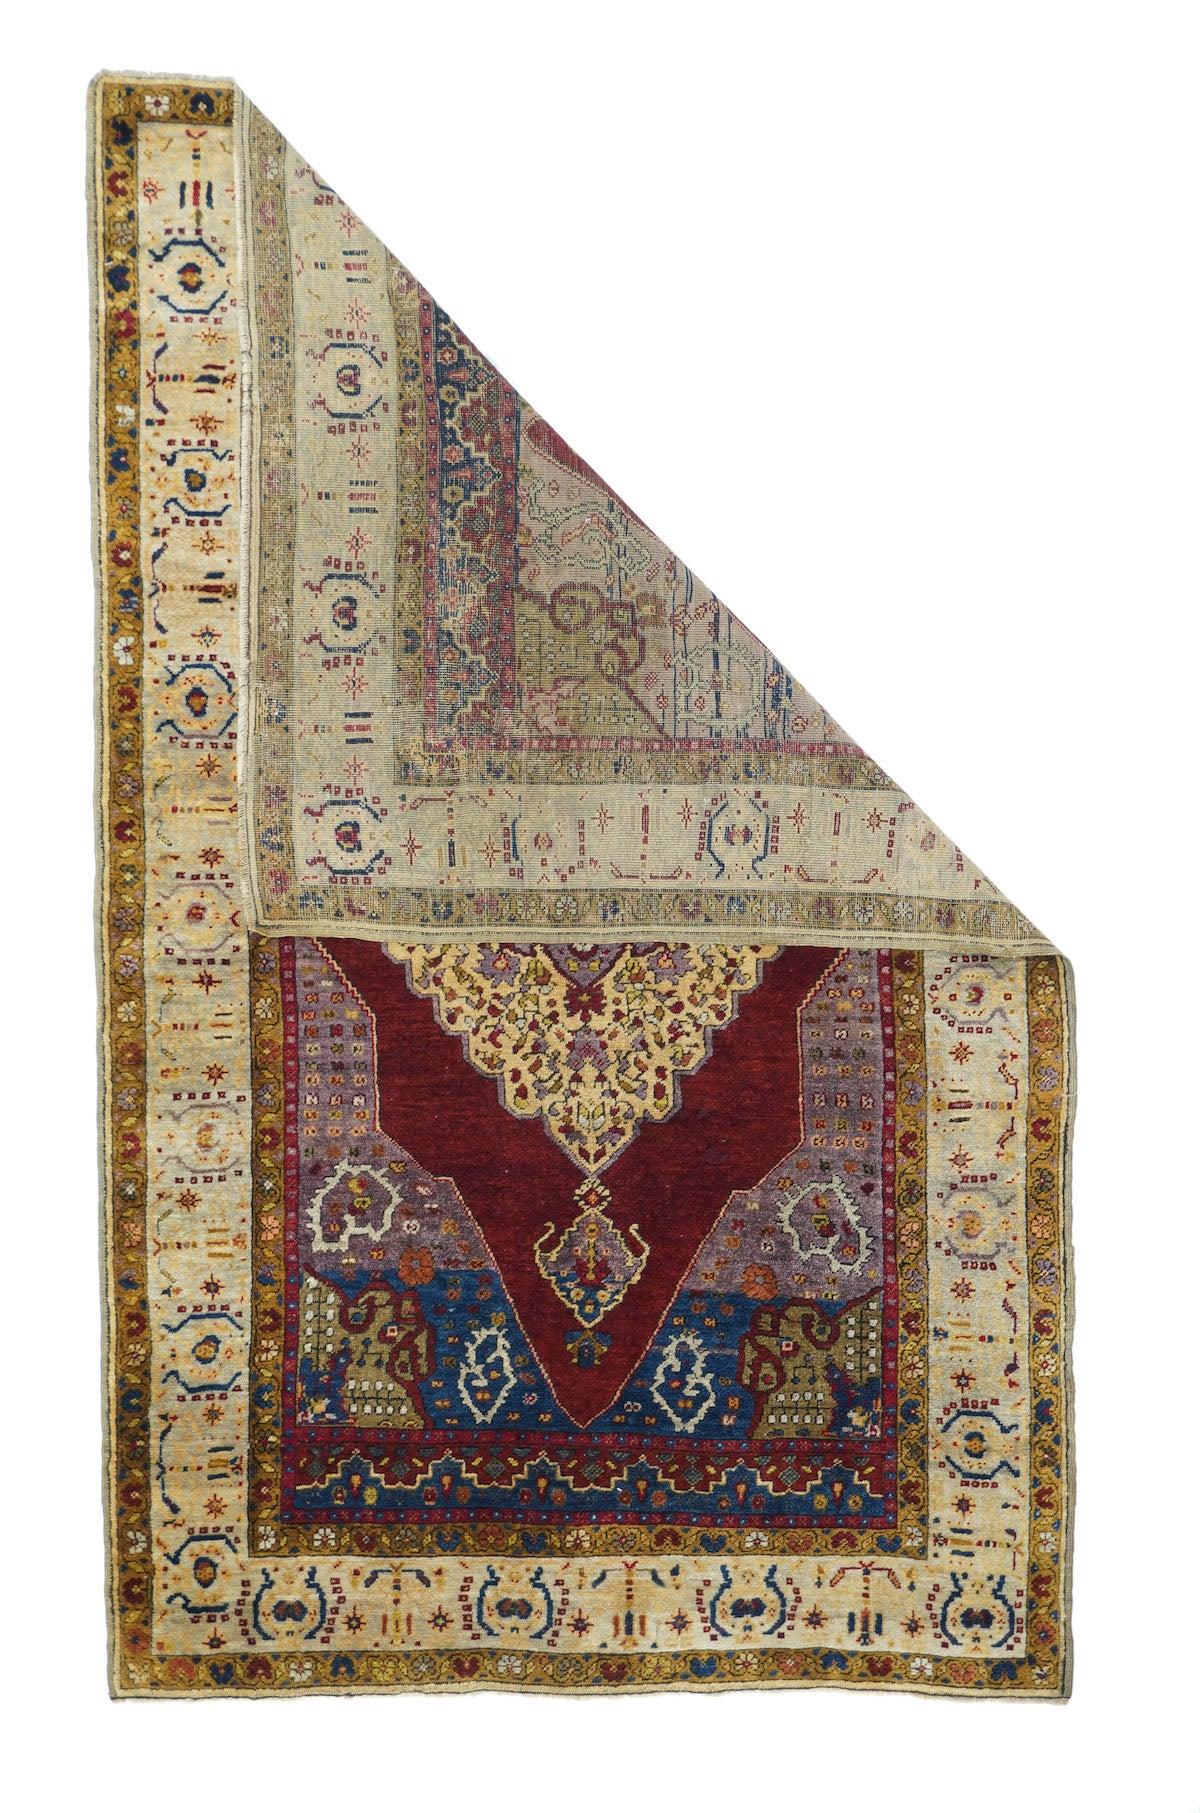 Antique Turkish Anatolian Rug, Measures : 3'9'' x 6'1''. All Anatolians are Turkish. An ecru strip style border of faceted parenthesis pairs frames the red Tabriz-esque field with blue-to-green abrashed corners and an ivory stepped and lobed lozenge